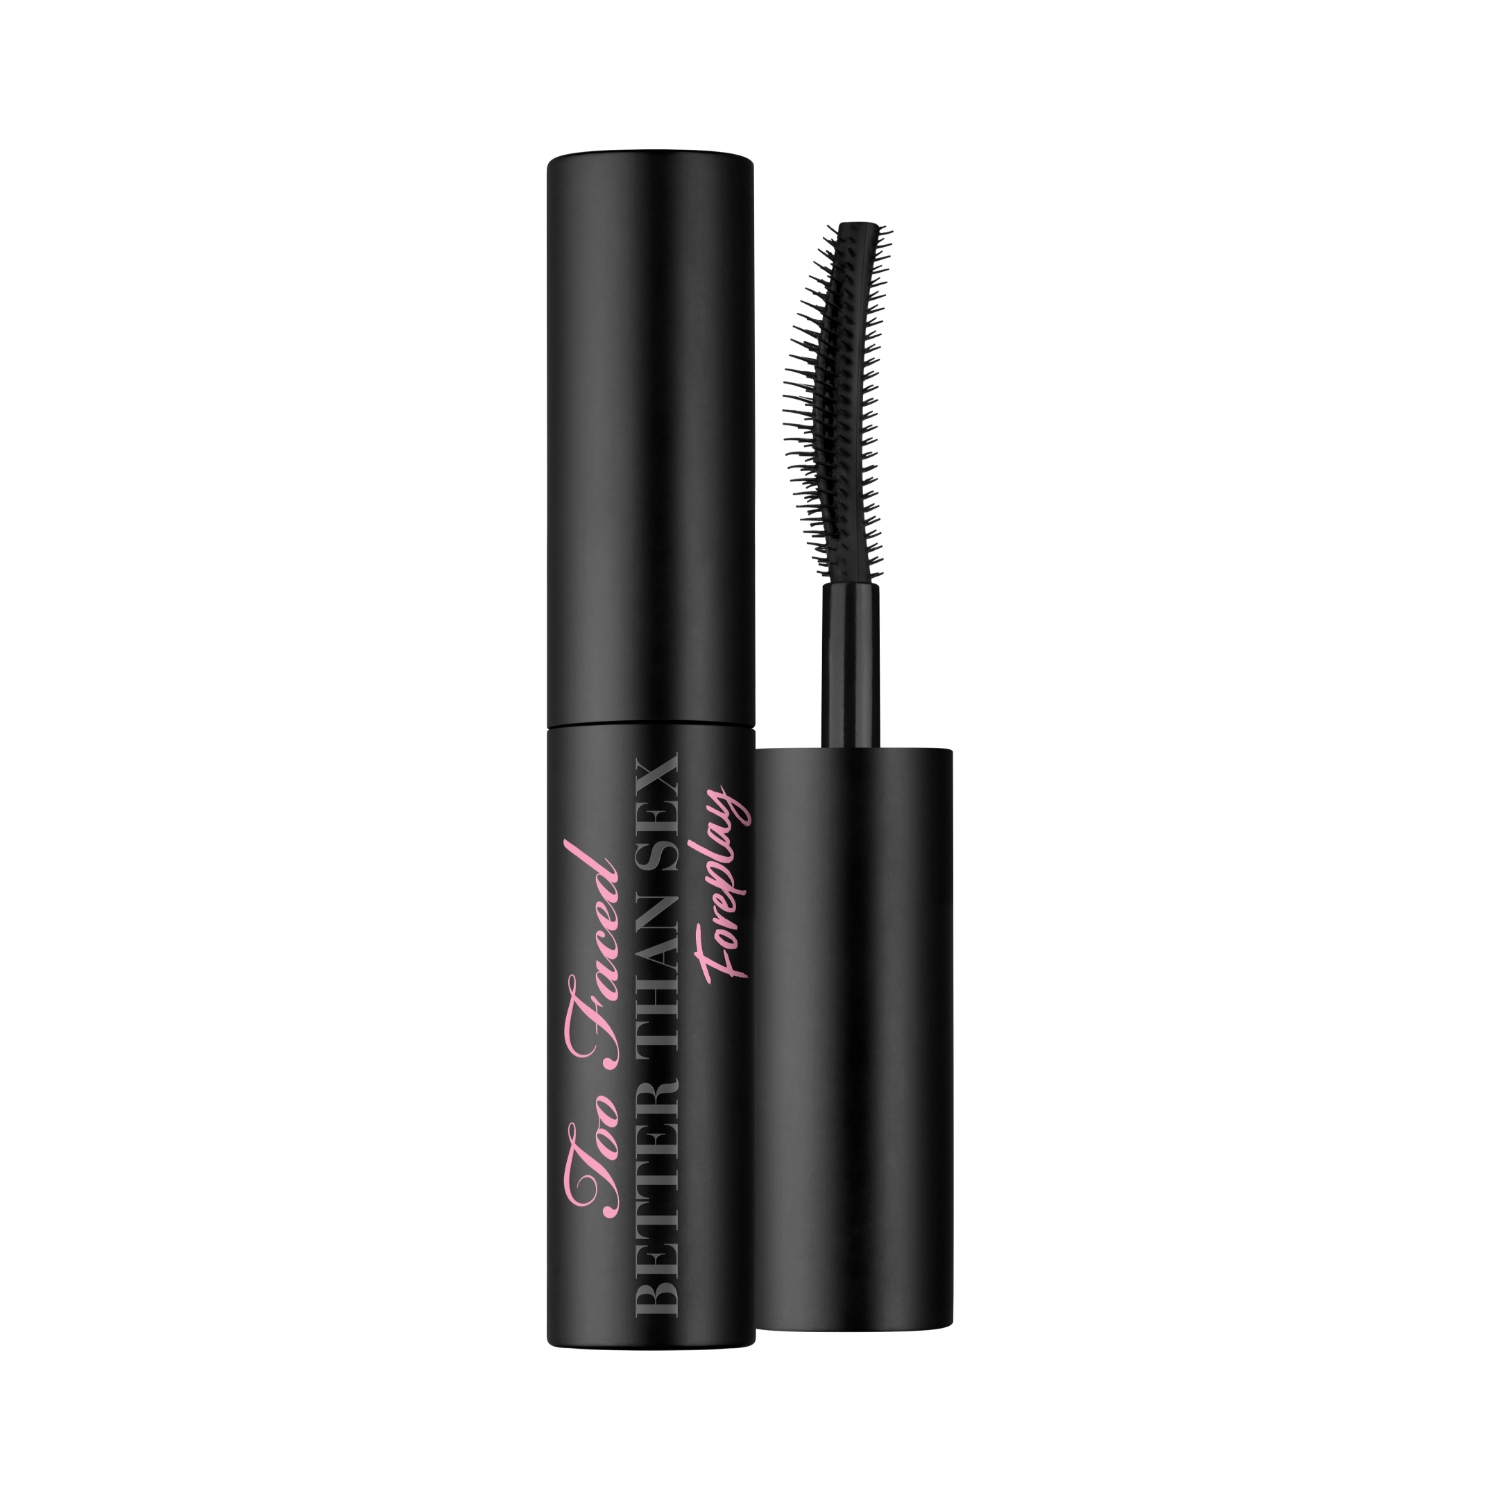 Too Faced | Too Faced Better Than Sex Foreplay Lash Primer - Travel Size (4ml)